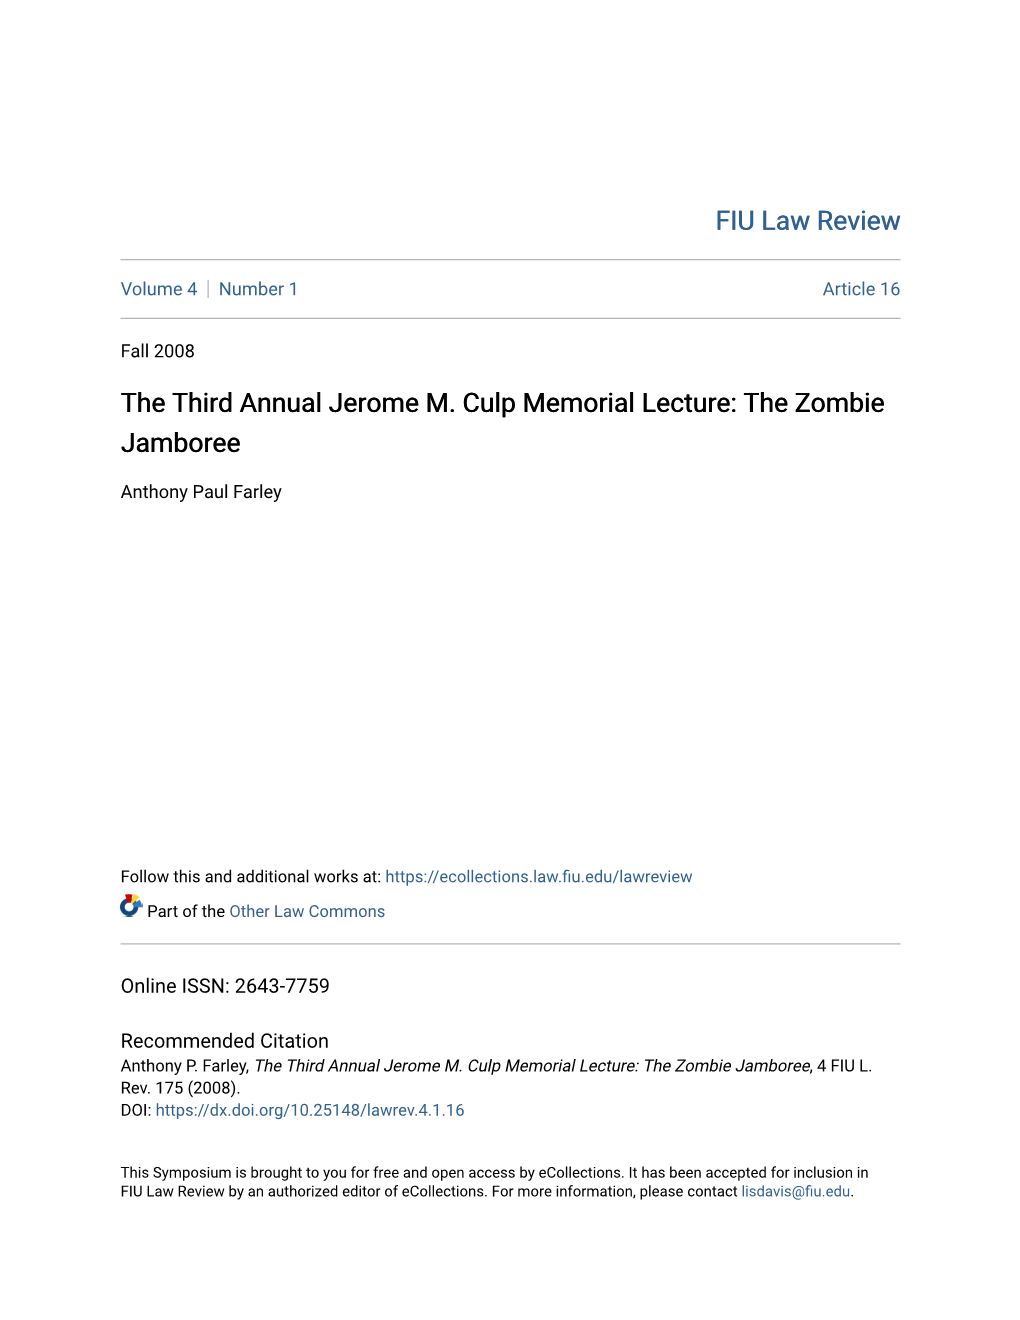 The Third Annual Jerome M. Culp Memorial Lecture: the Zombie Jamboree